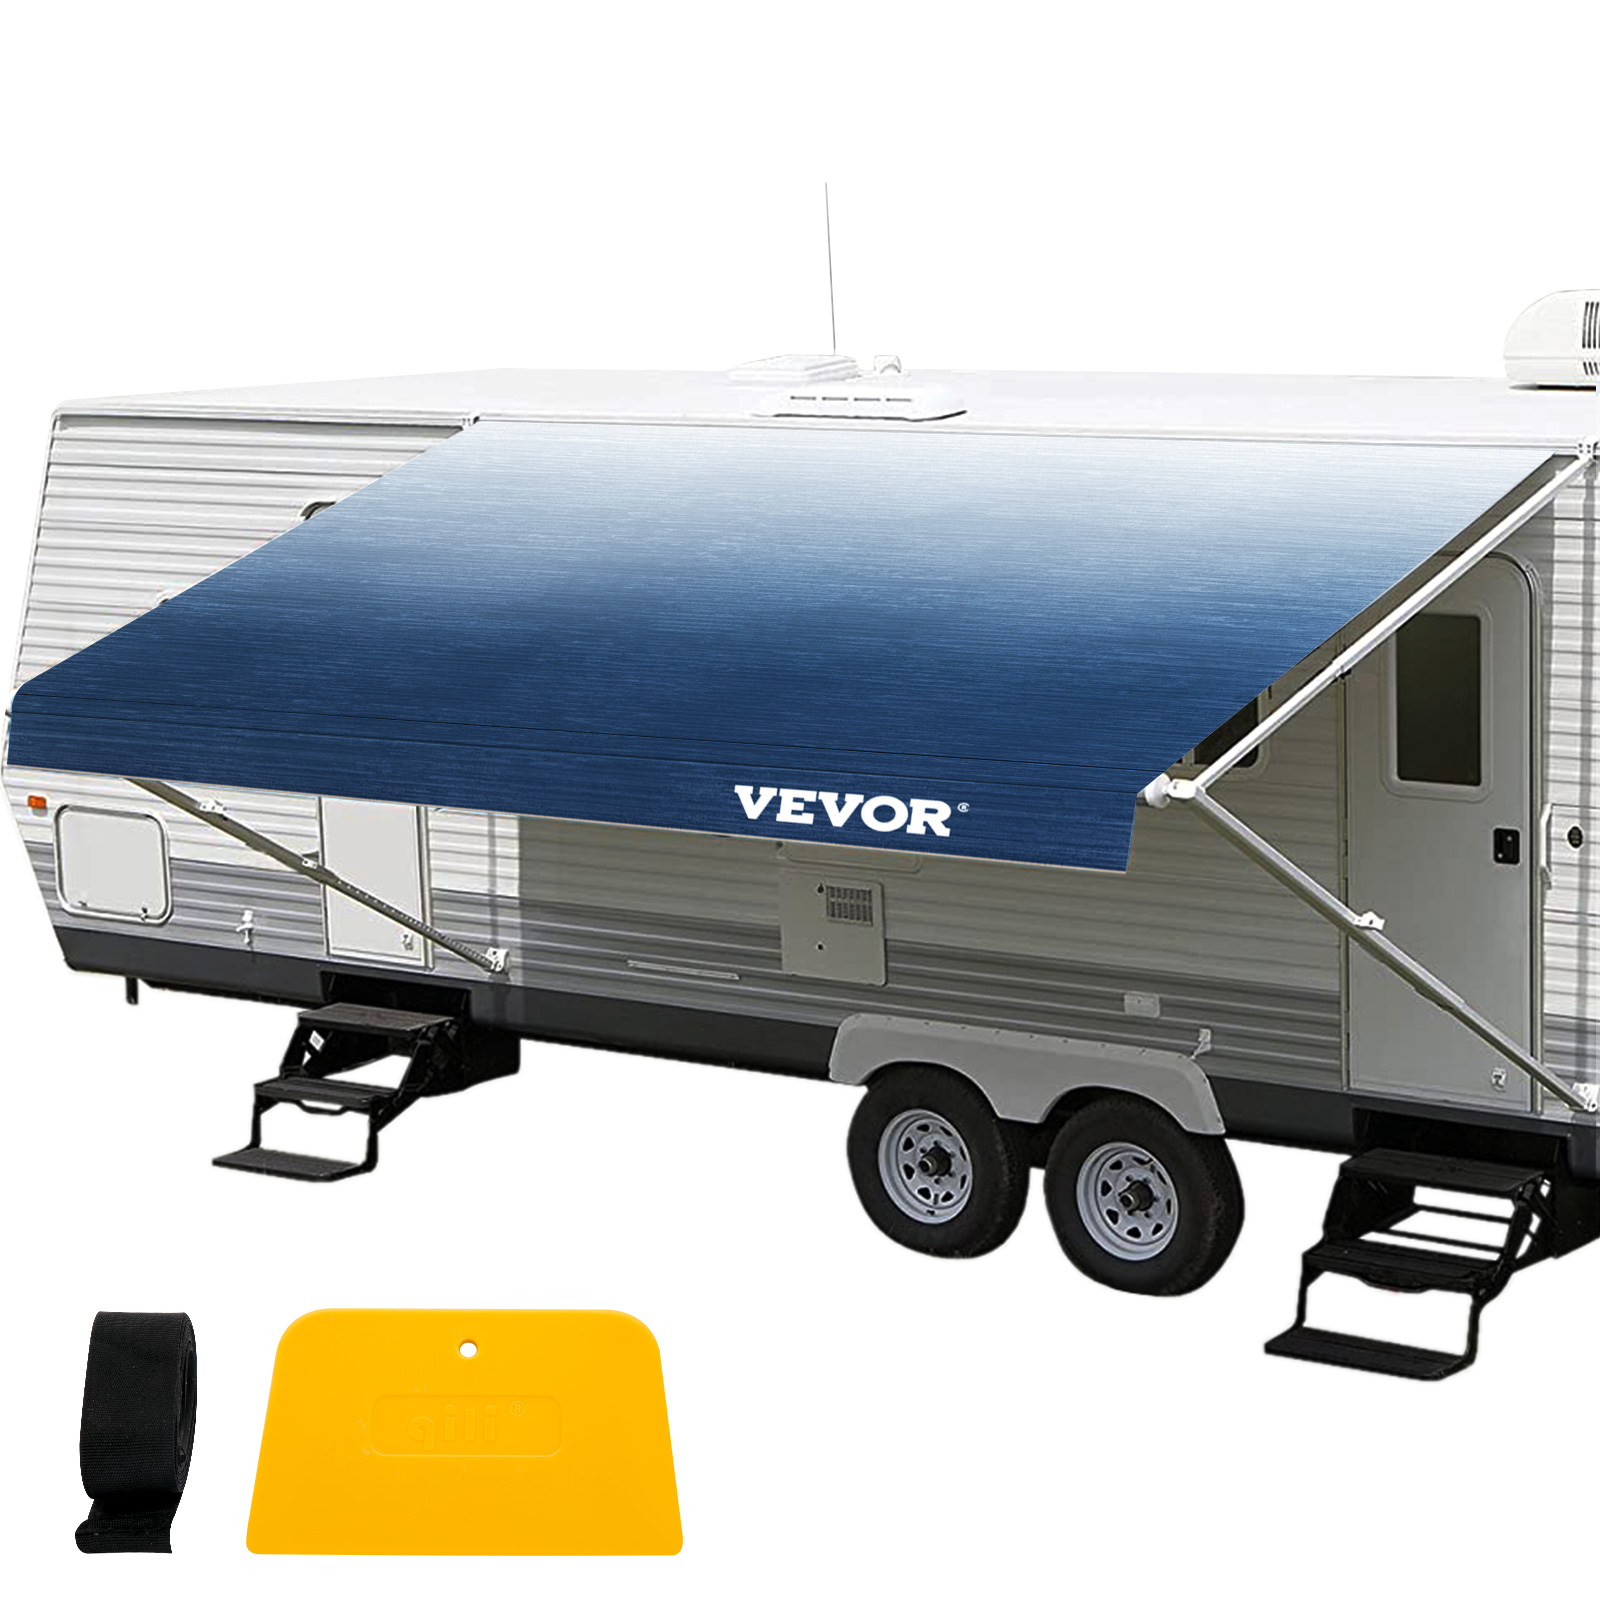 21' Slate Blue Fade W/wht Wg, Rv Awning Replacement Fabric Canopy (fabric:20'2") от Vevor Many GEOs